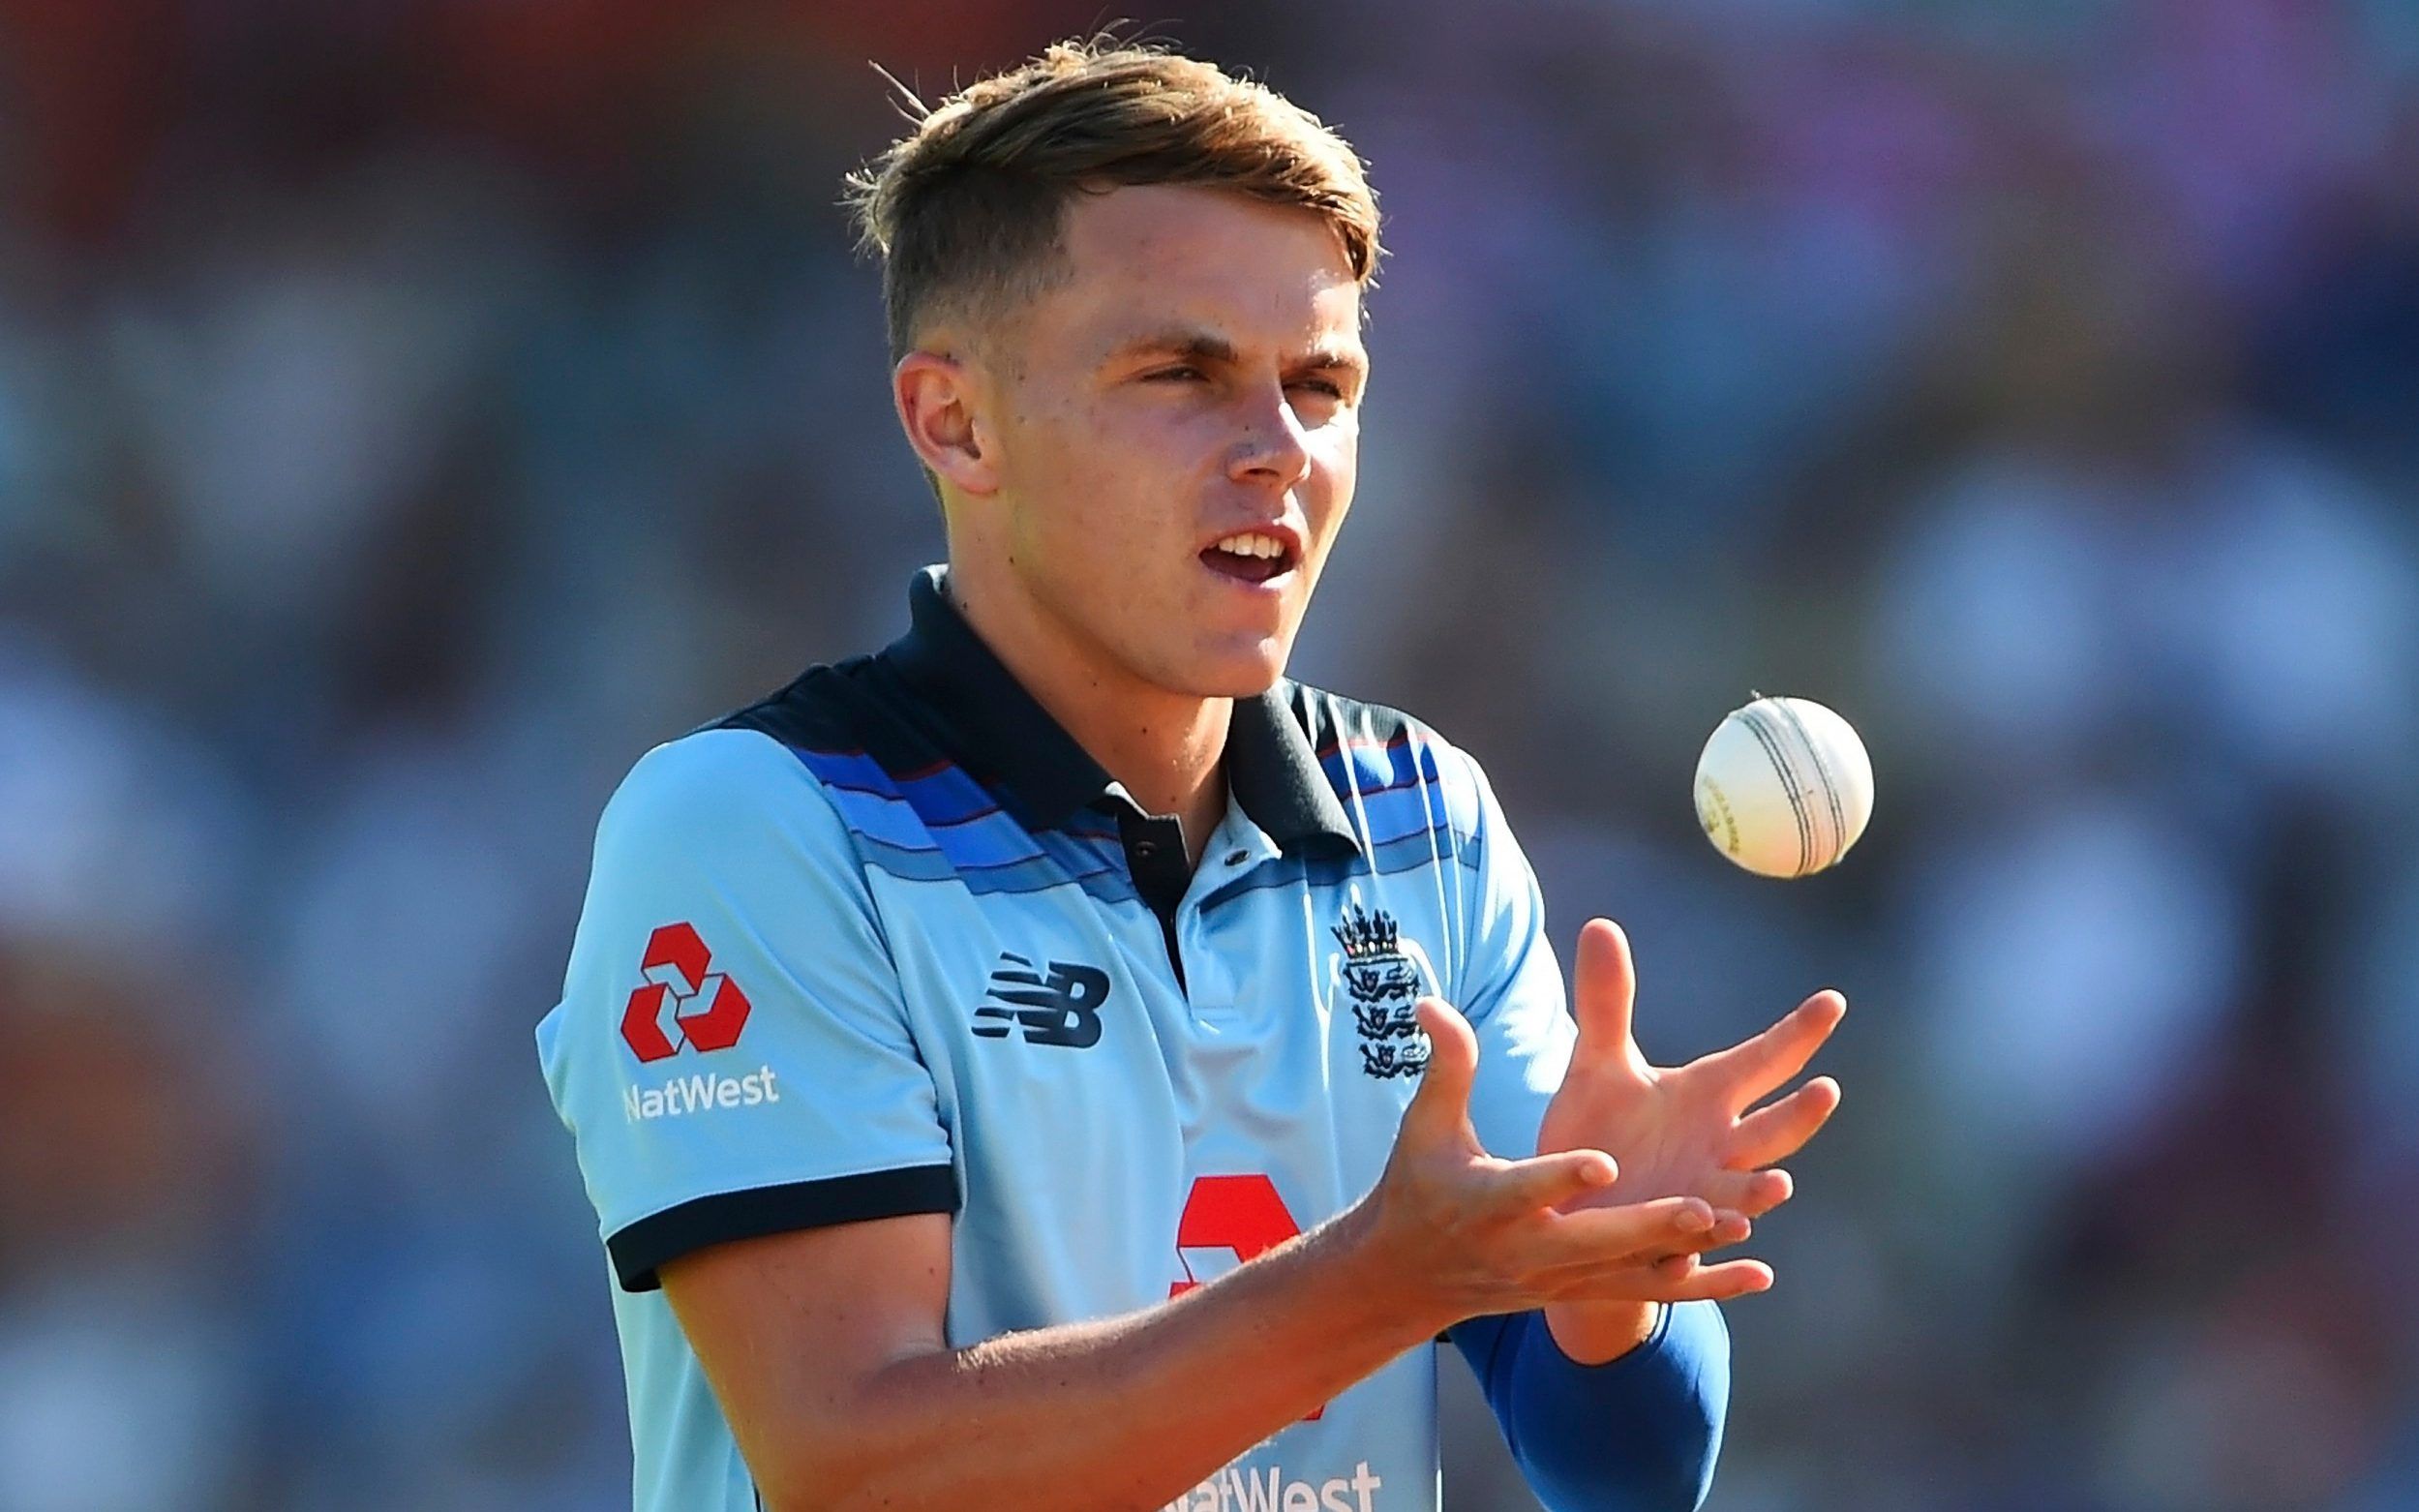 England Player Sam Curran / India Vs England 2021 Sam Curran Rested For 3rd Test To Avoid Bubble Fatigue, Find out more at ecb.co.uk sam curran reacts to his incredible 3